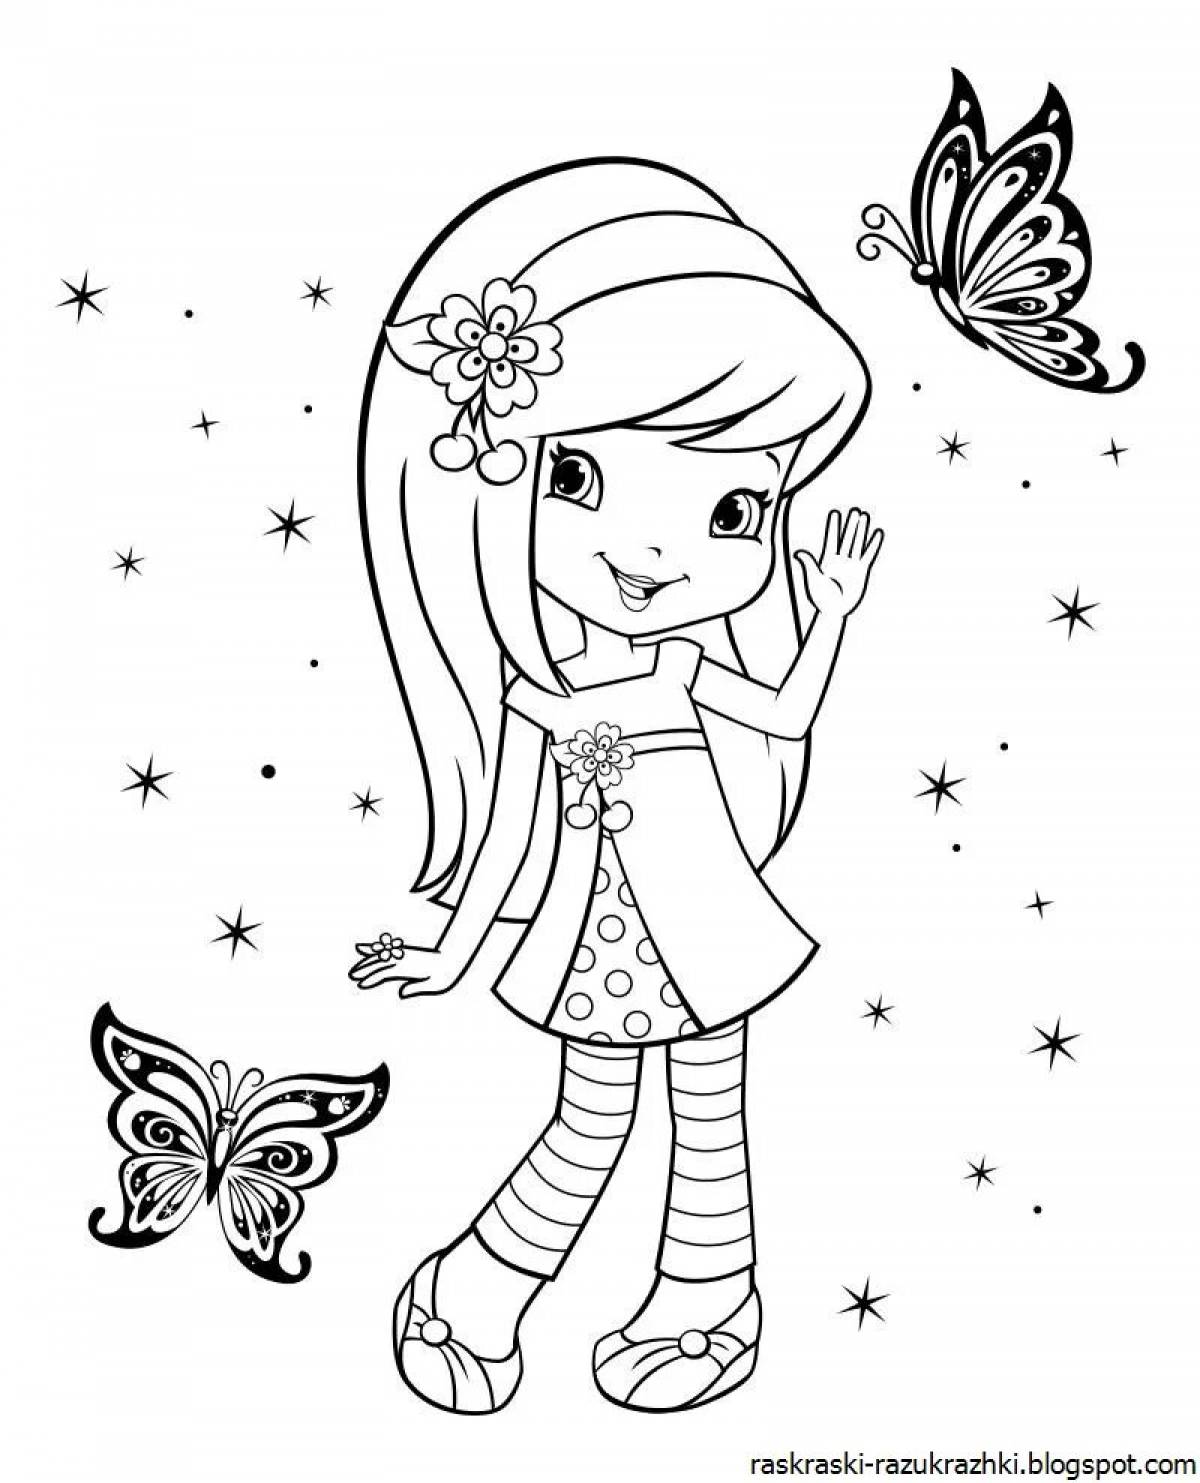 Charlotte strawberry coloring book for girls